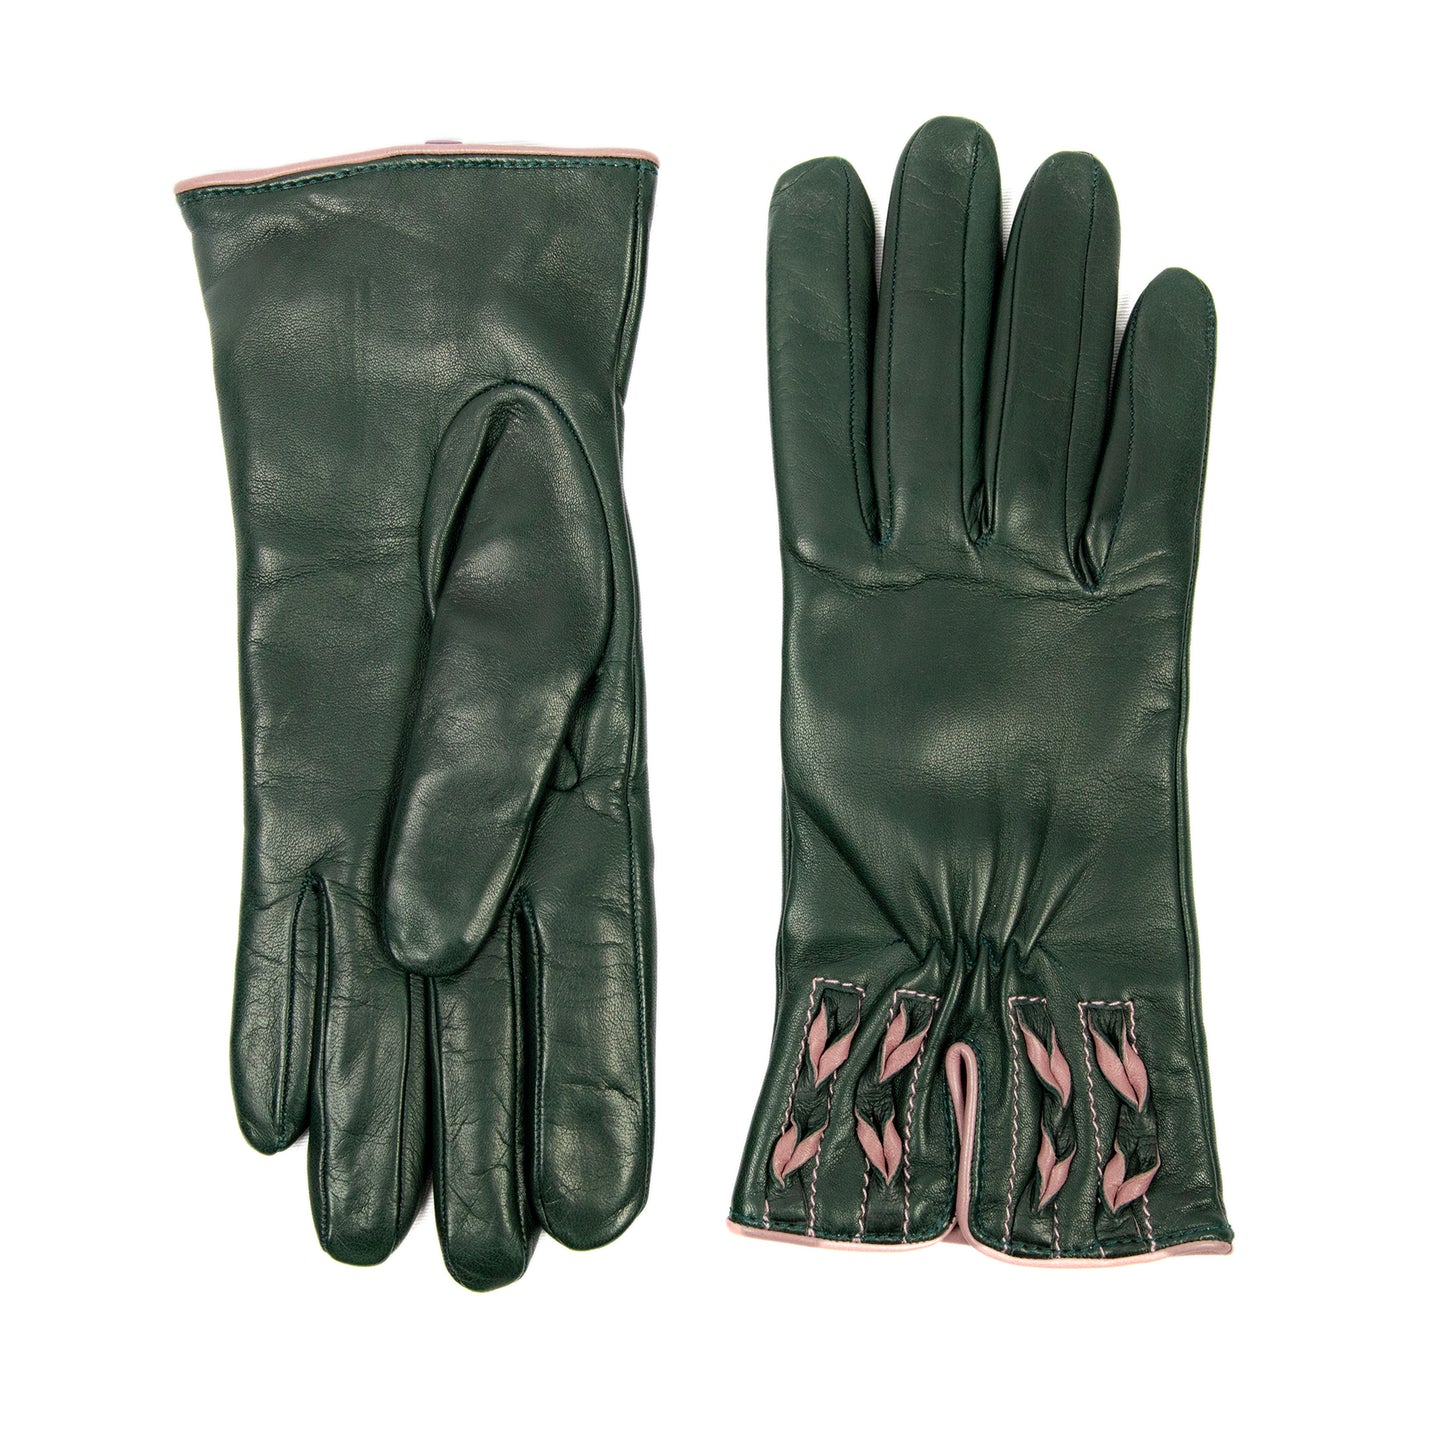 Woman's green nappa leather gloves and bicolour braided cuff